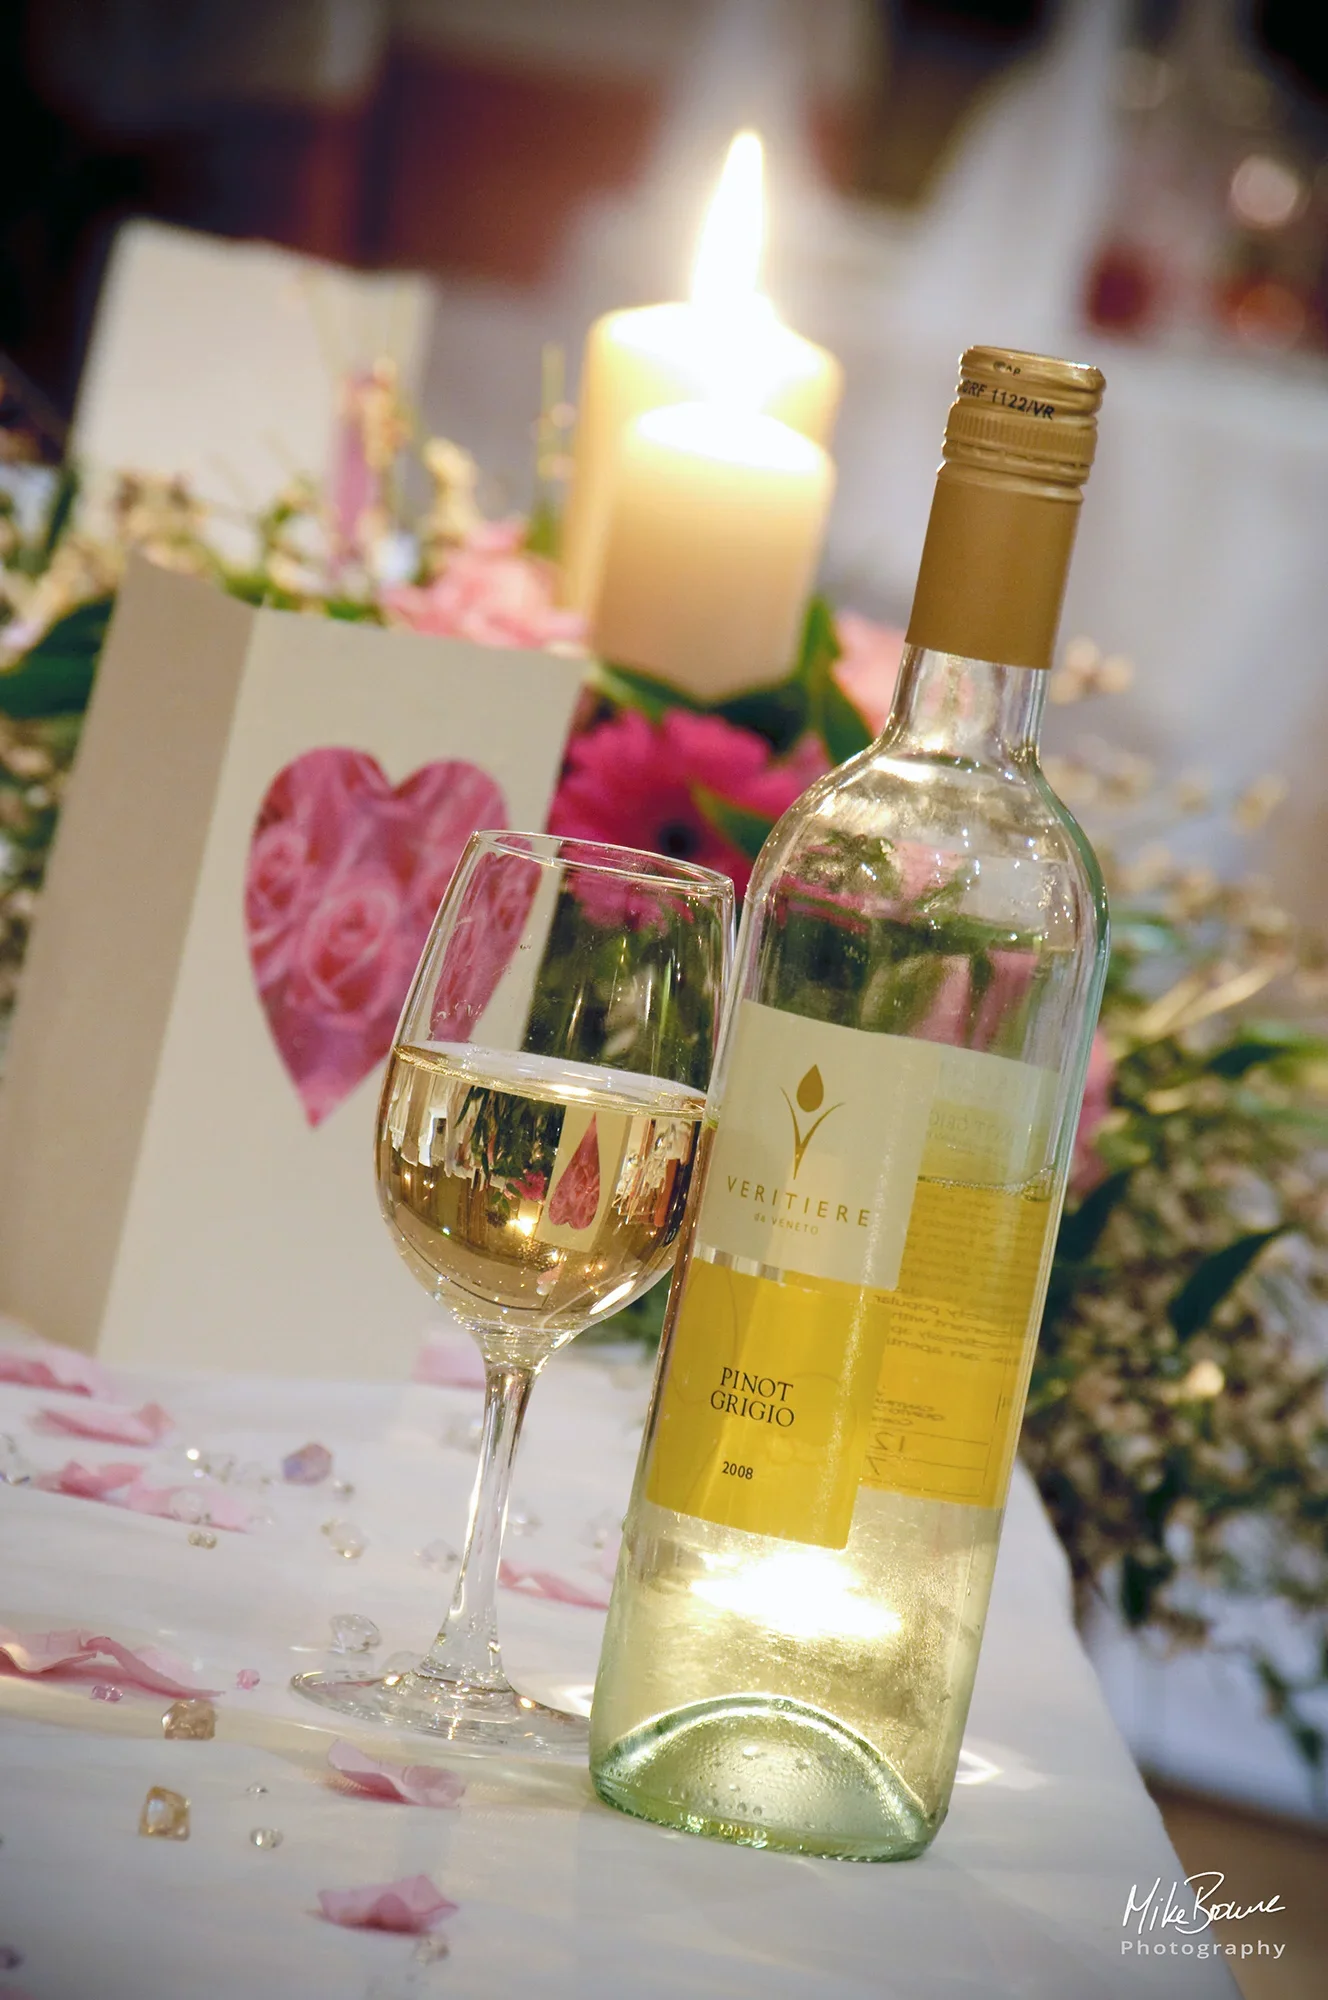 Bottle and glass of white wine on a table with flowers, candles and a card with a heart